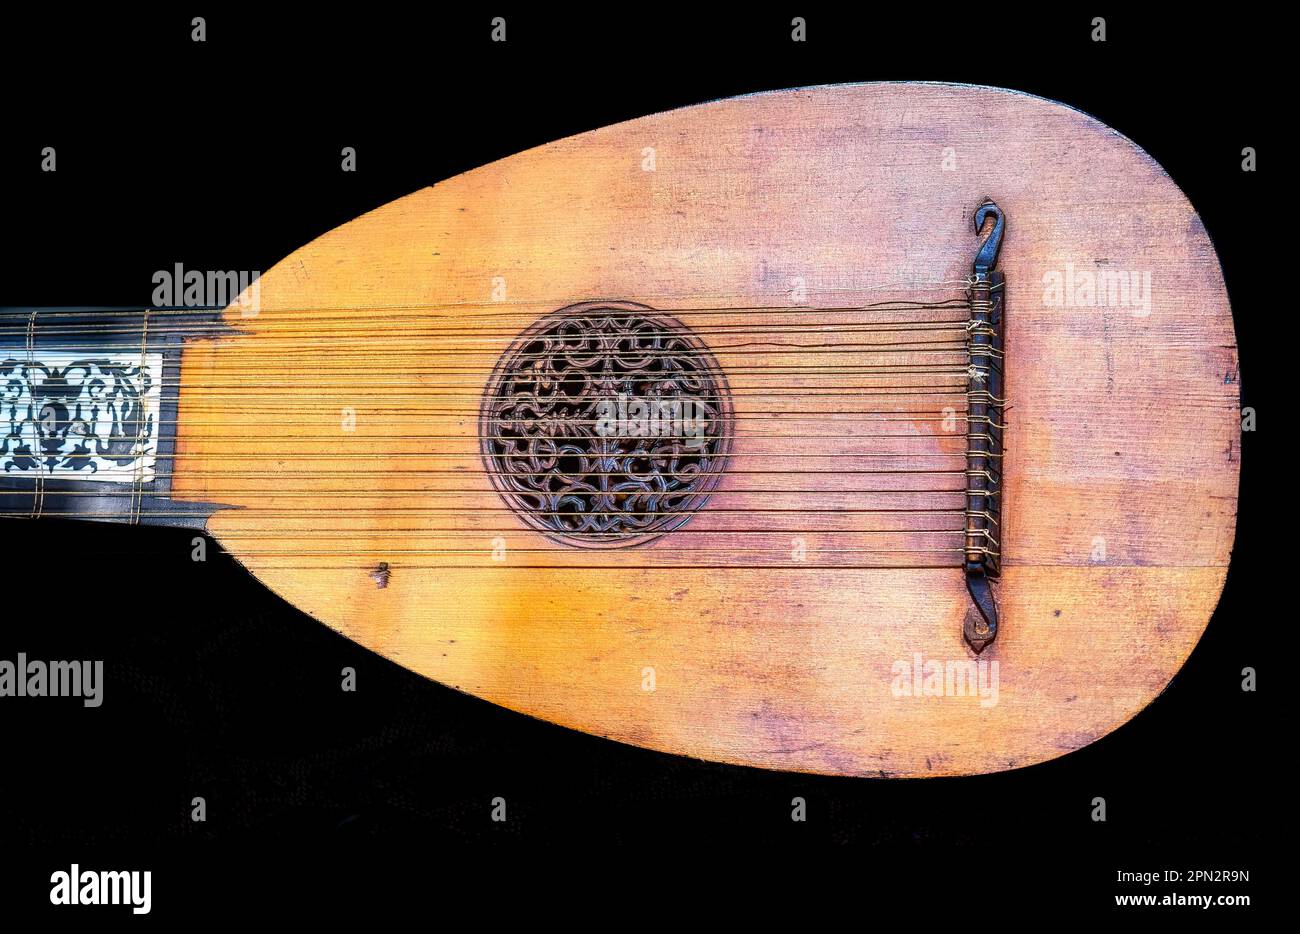 Toronto, Canada - April 7, 2023: Antique guitar or acoustic musical instrument. The object is part of an exhibit in the Royal Ontario Museum. Stock Photo